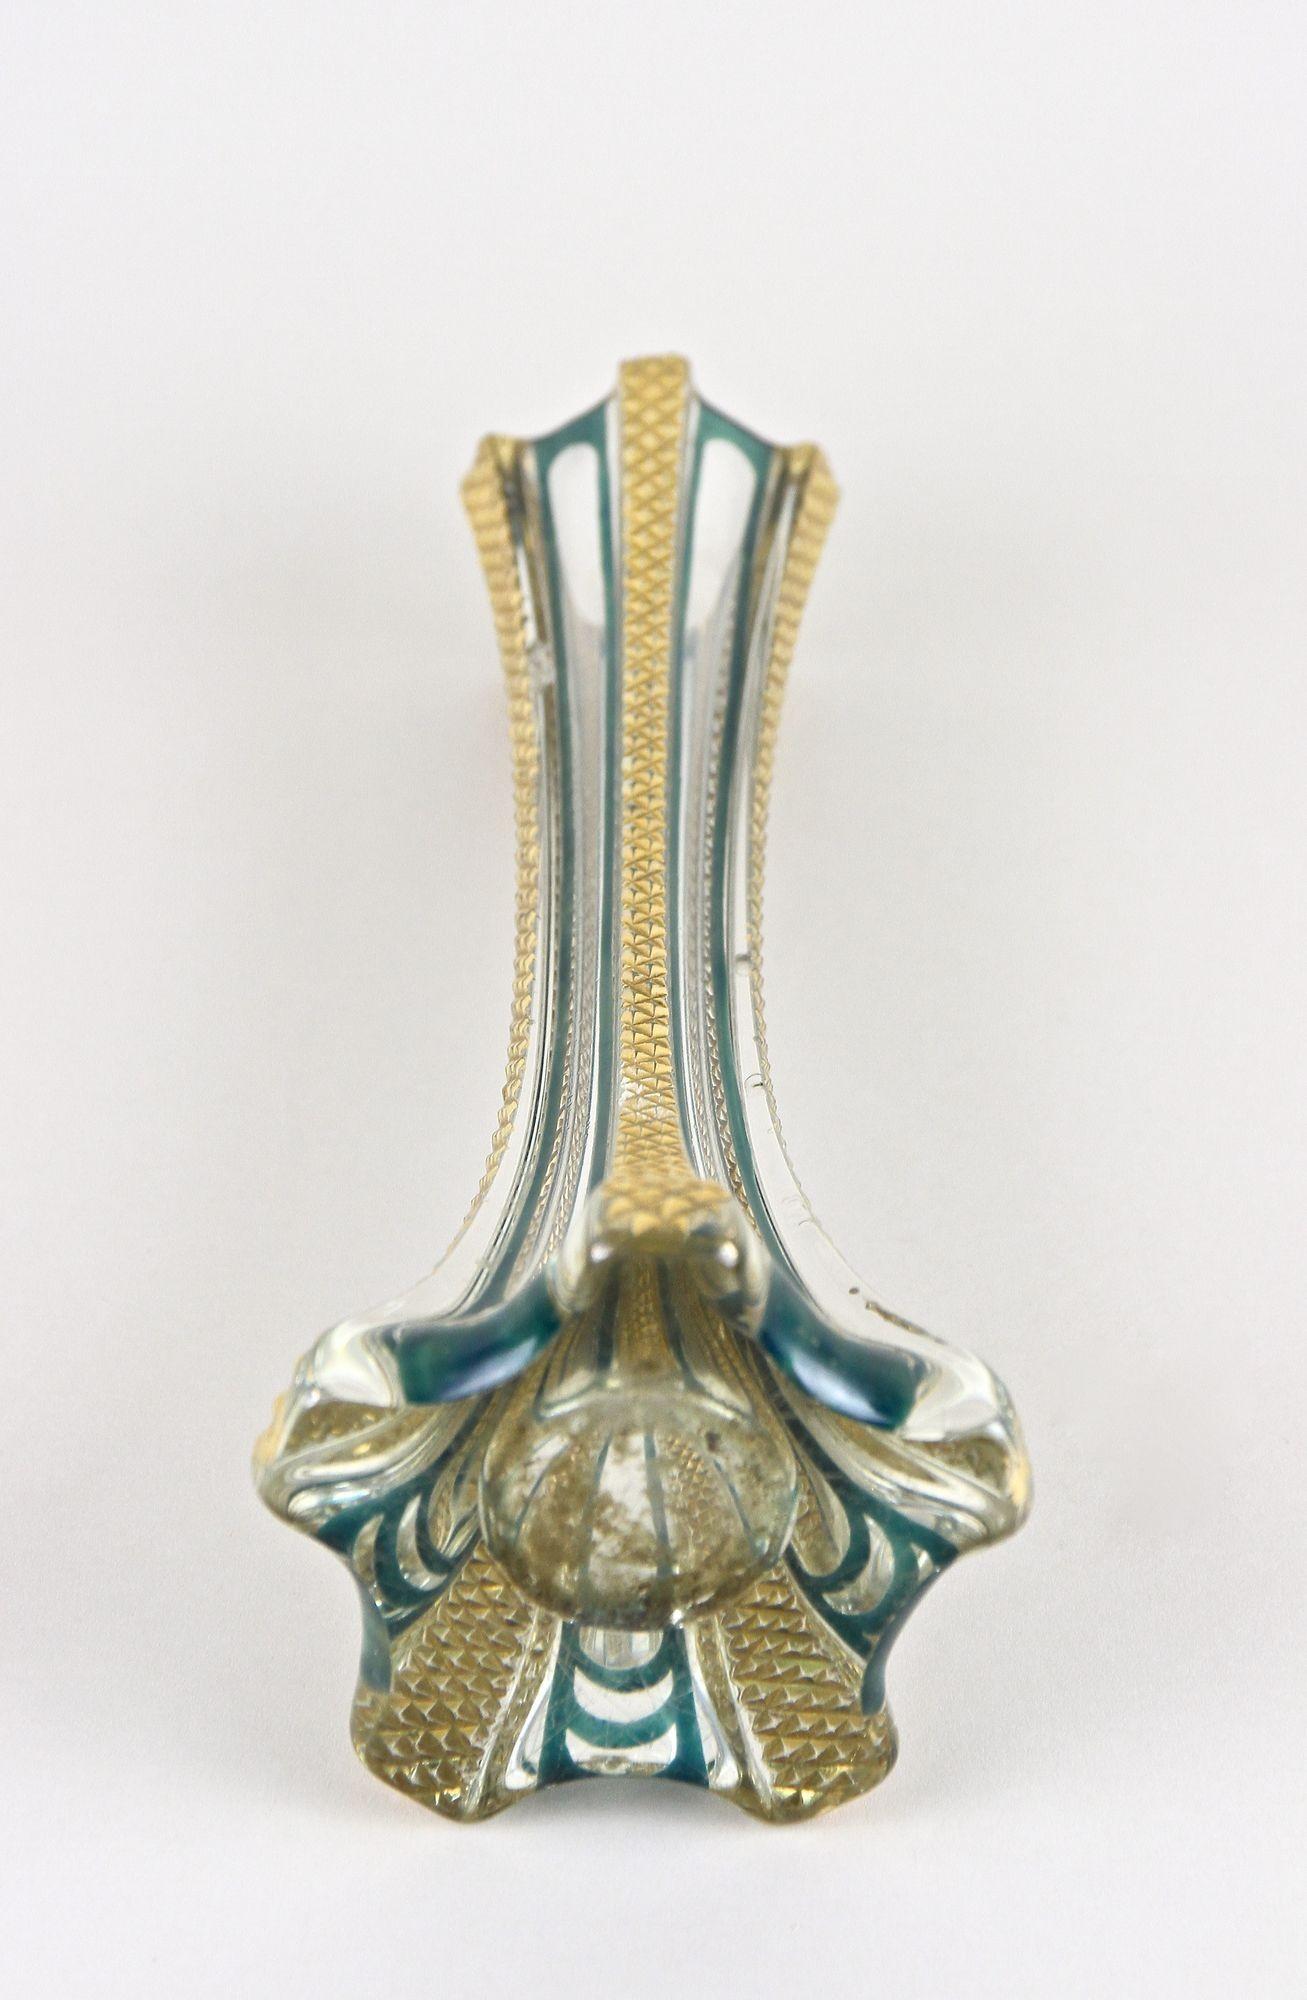 Murano Glass Vase With Gold Accents, Early 20th Century - Italy ca. 1930 For Sale 10